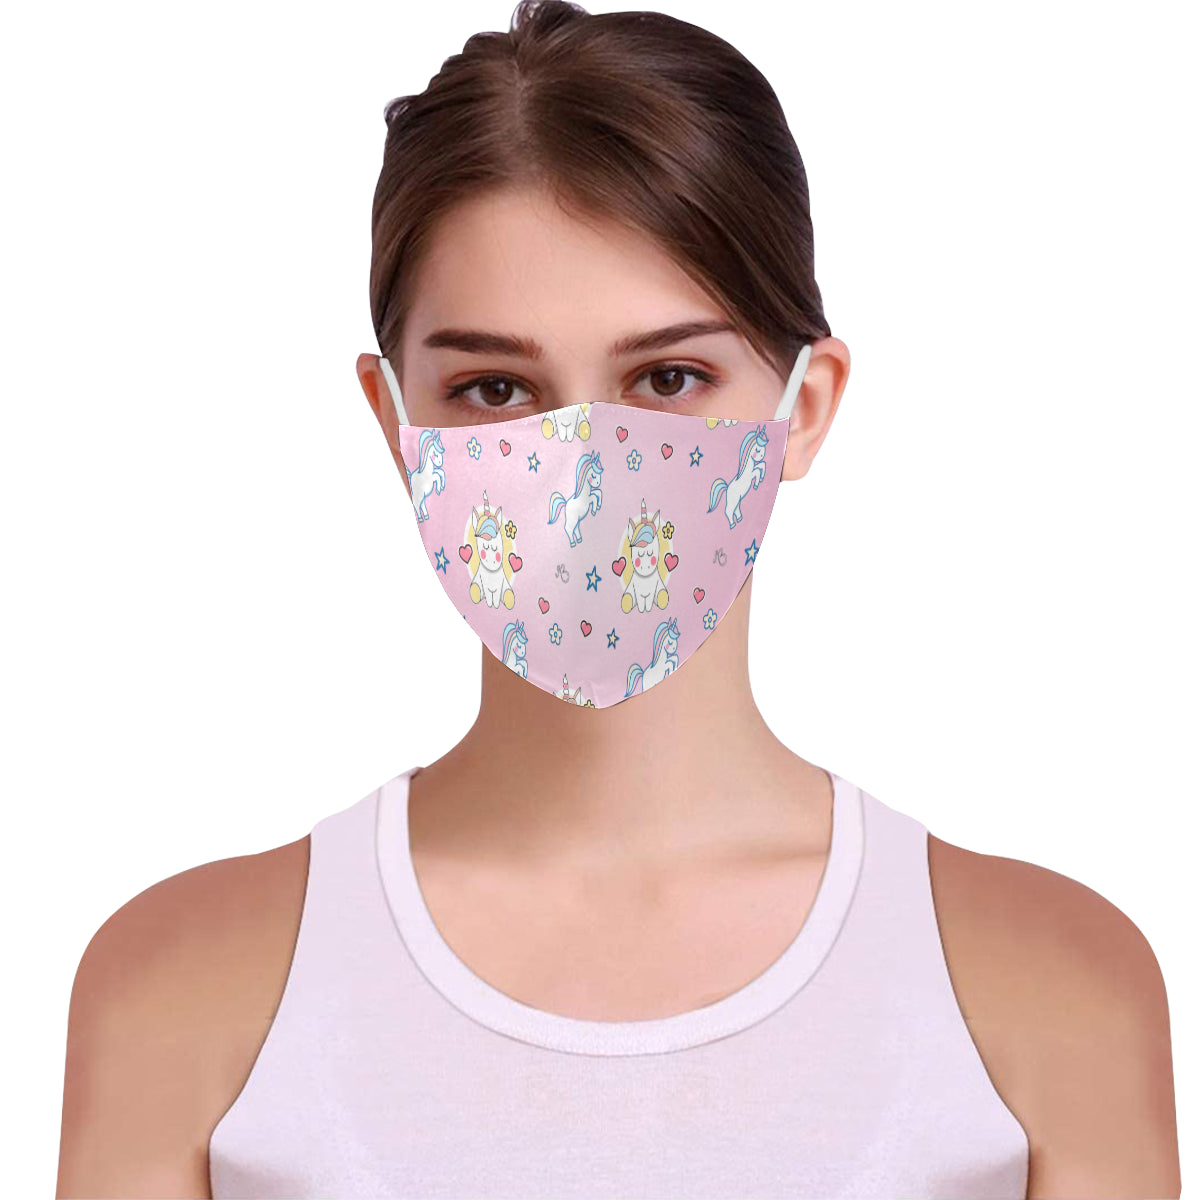 Unicorn print Cotton Fabric Face Mask with Filter Slot & Adjustable Strap (Pack of 5) - Non-medical use